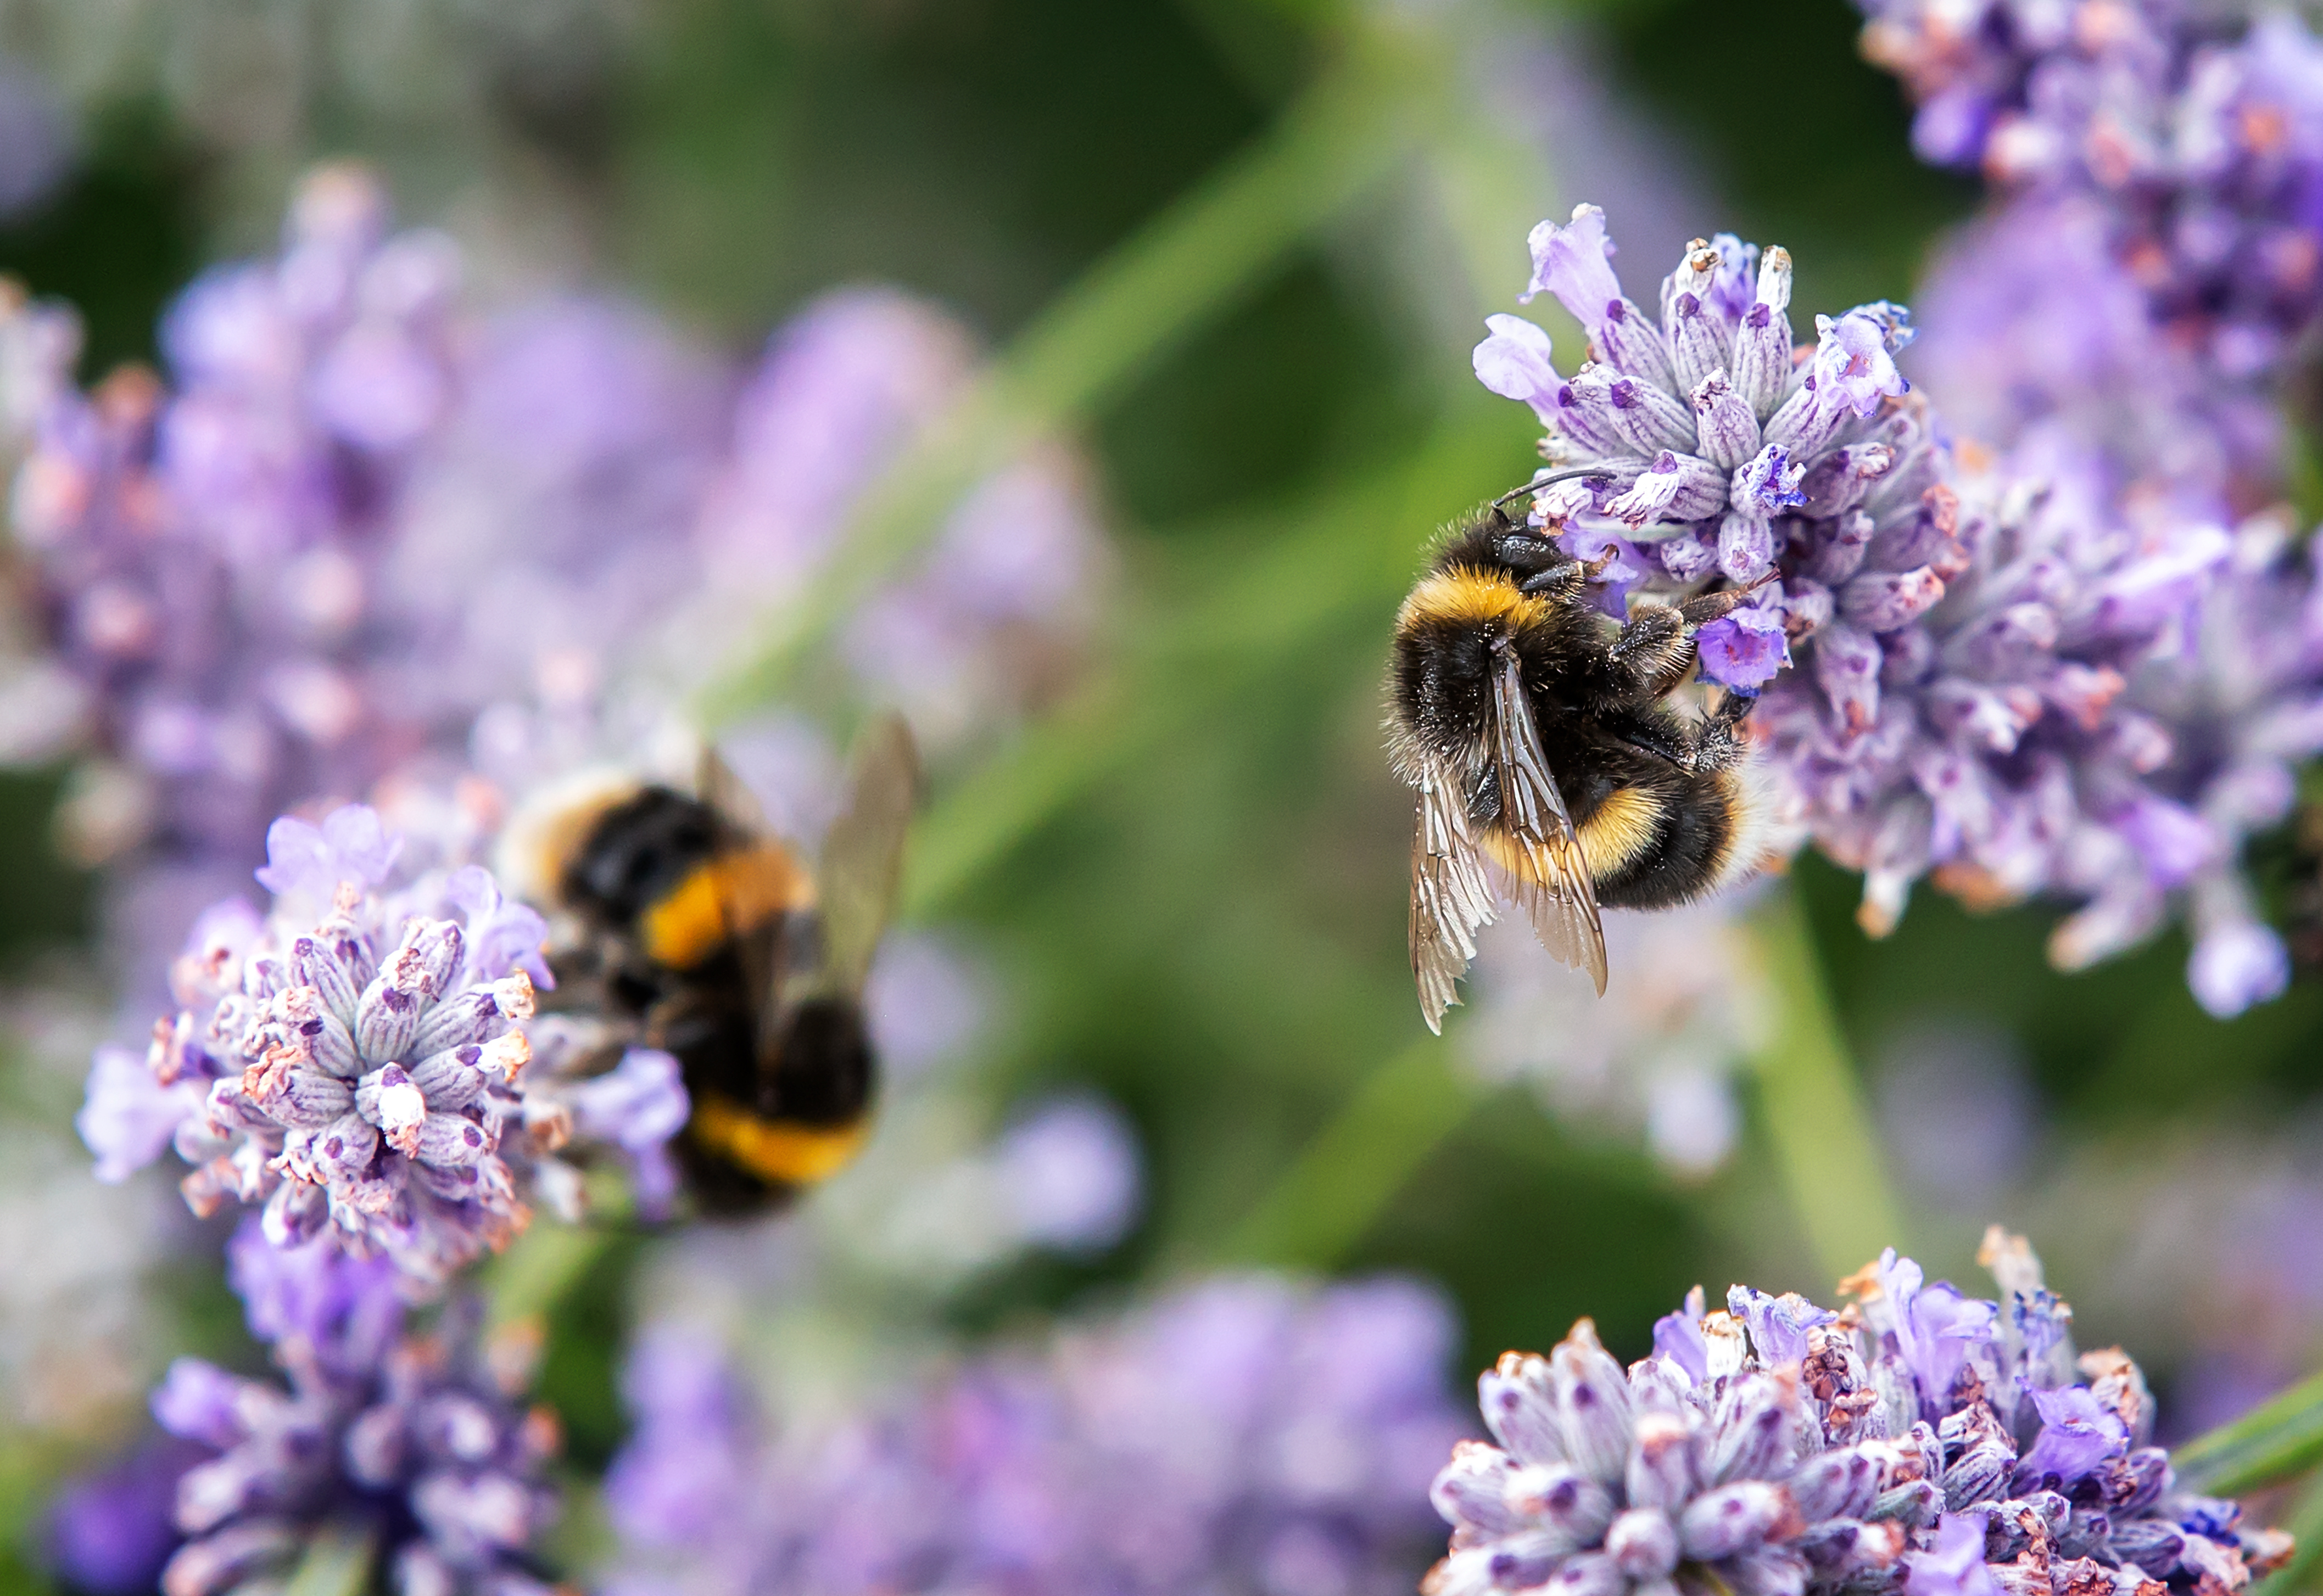 Bees are known for loving cornflowers, sunflowers and wildflower mixtures